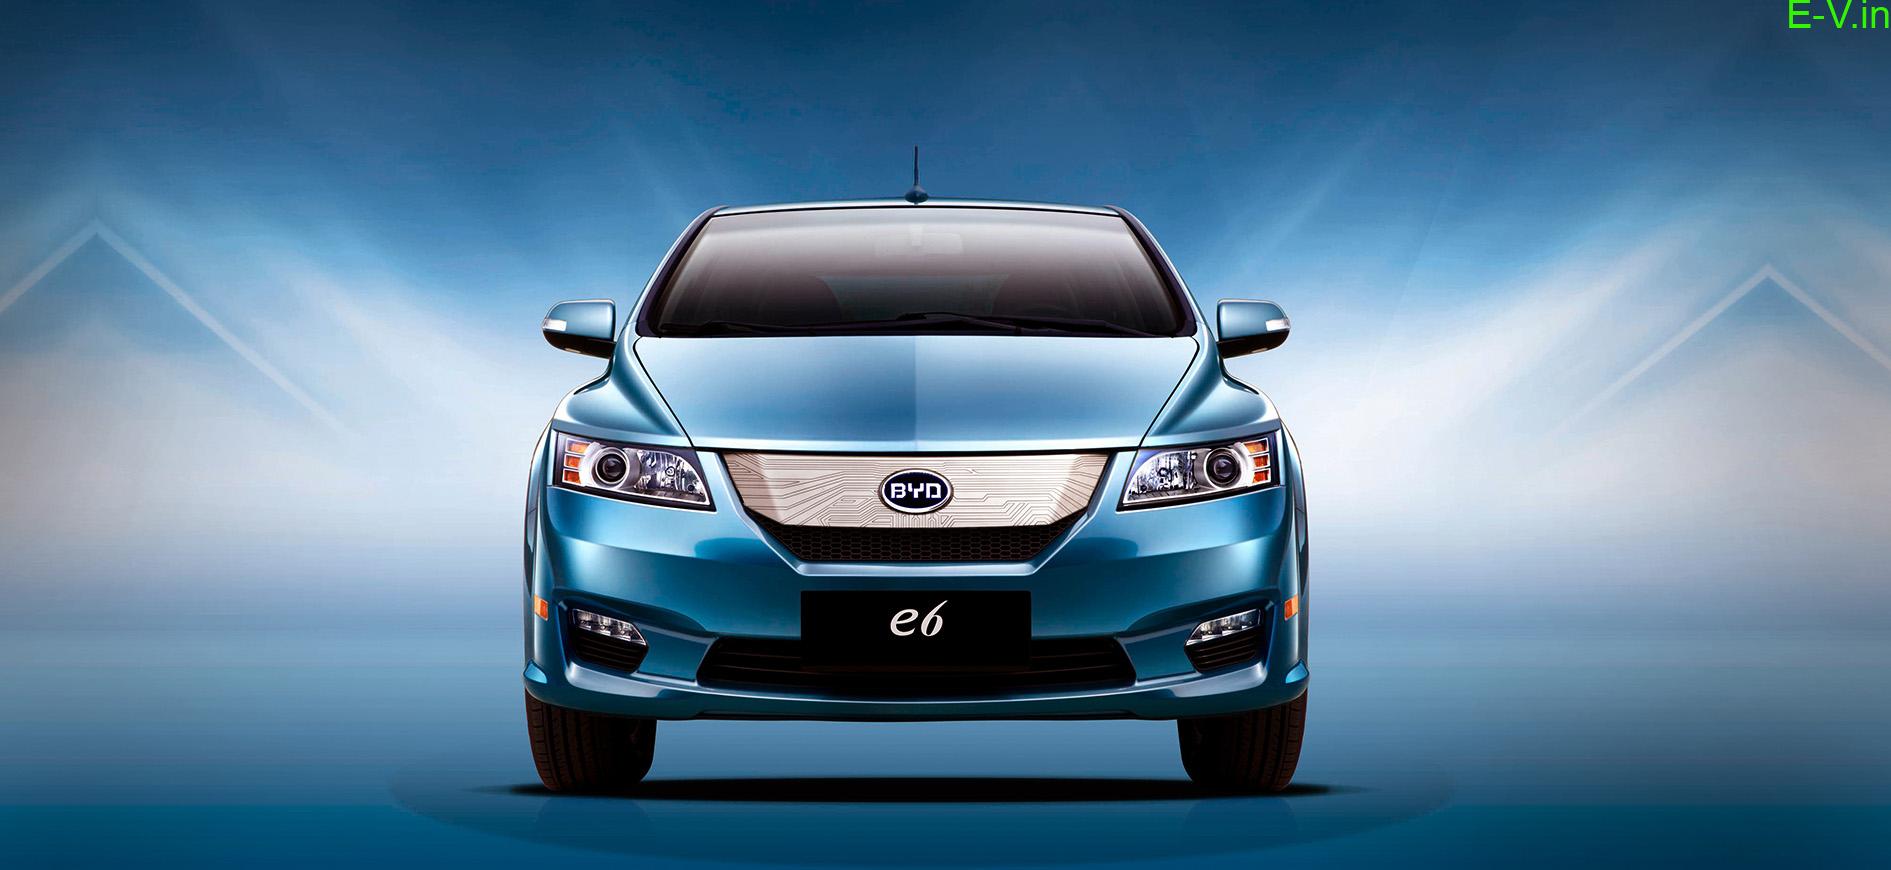 BYD launches e6 electric MPV in India Promoting Eco Friendly Travel